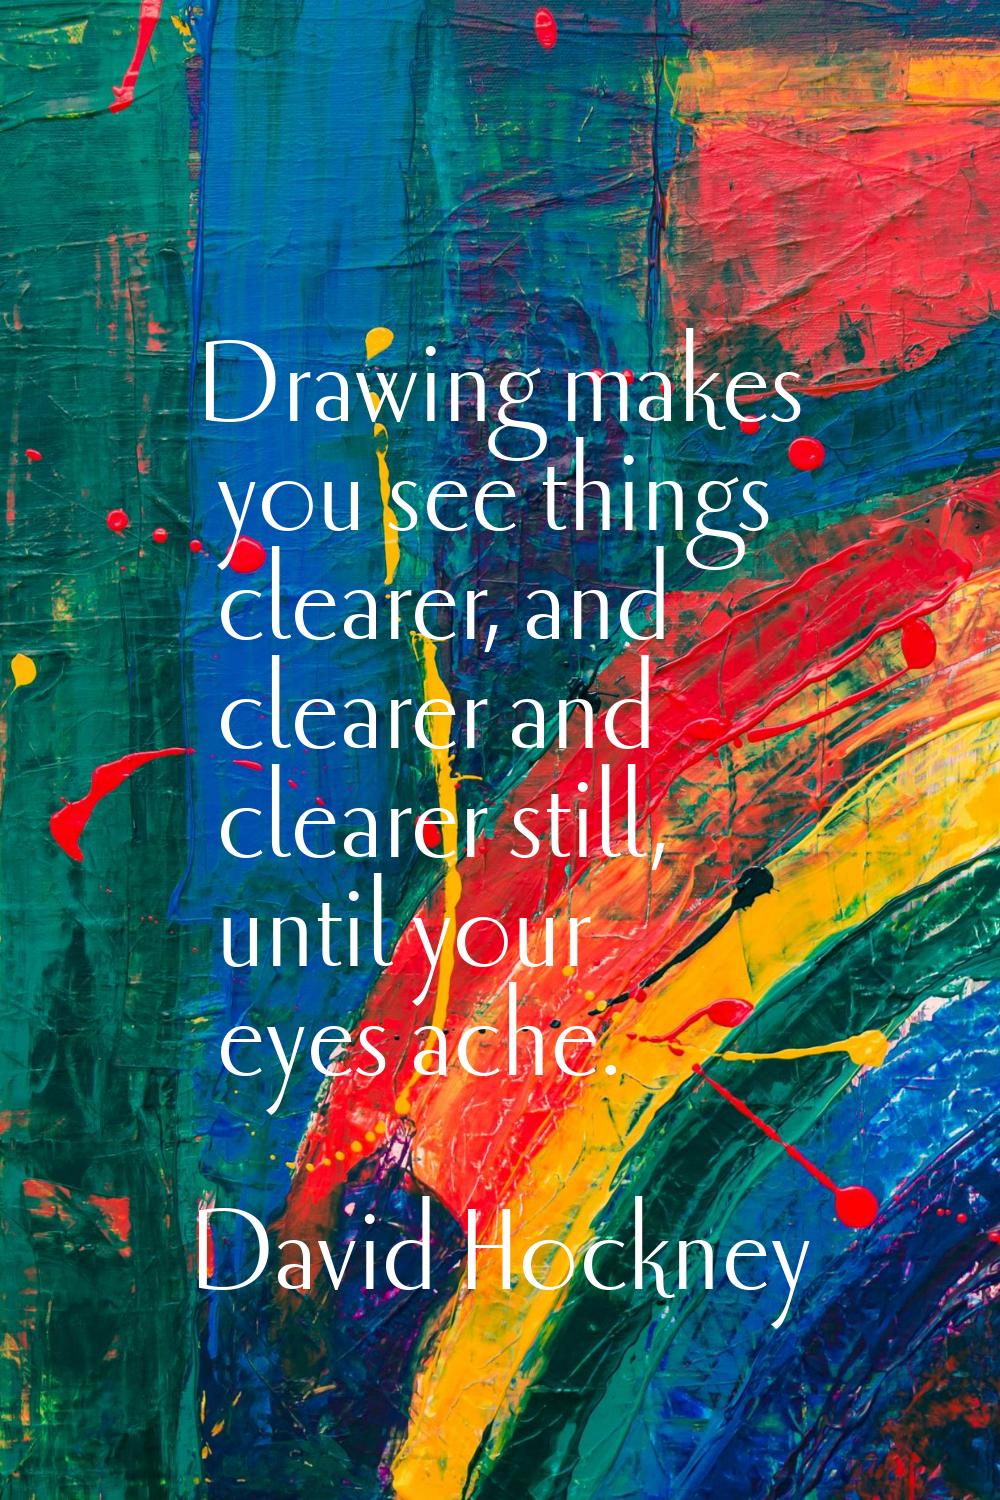 Drawing makes you see things clearer, and clearer and clearer still, until your eyes ache.